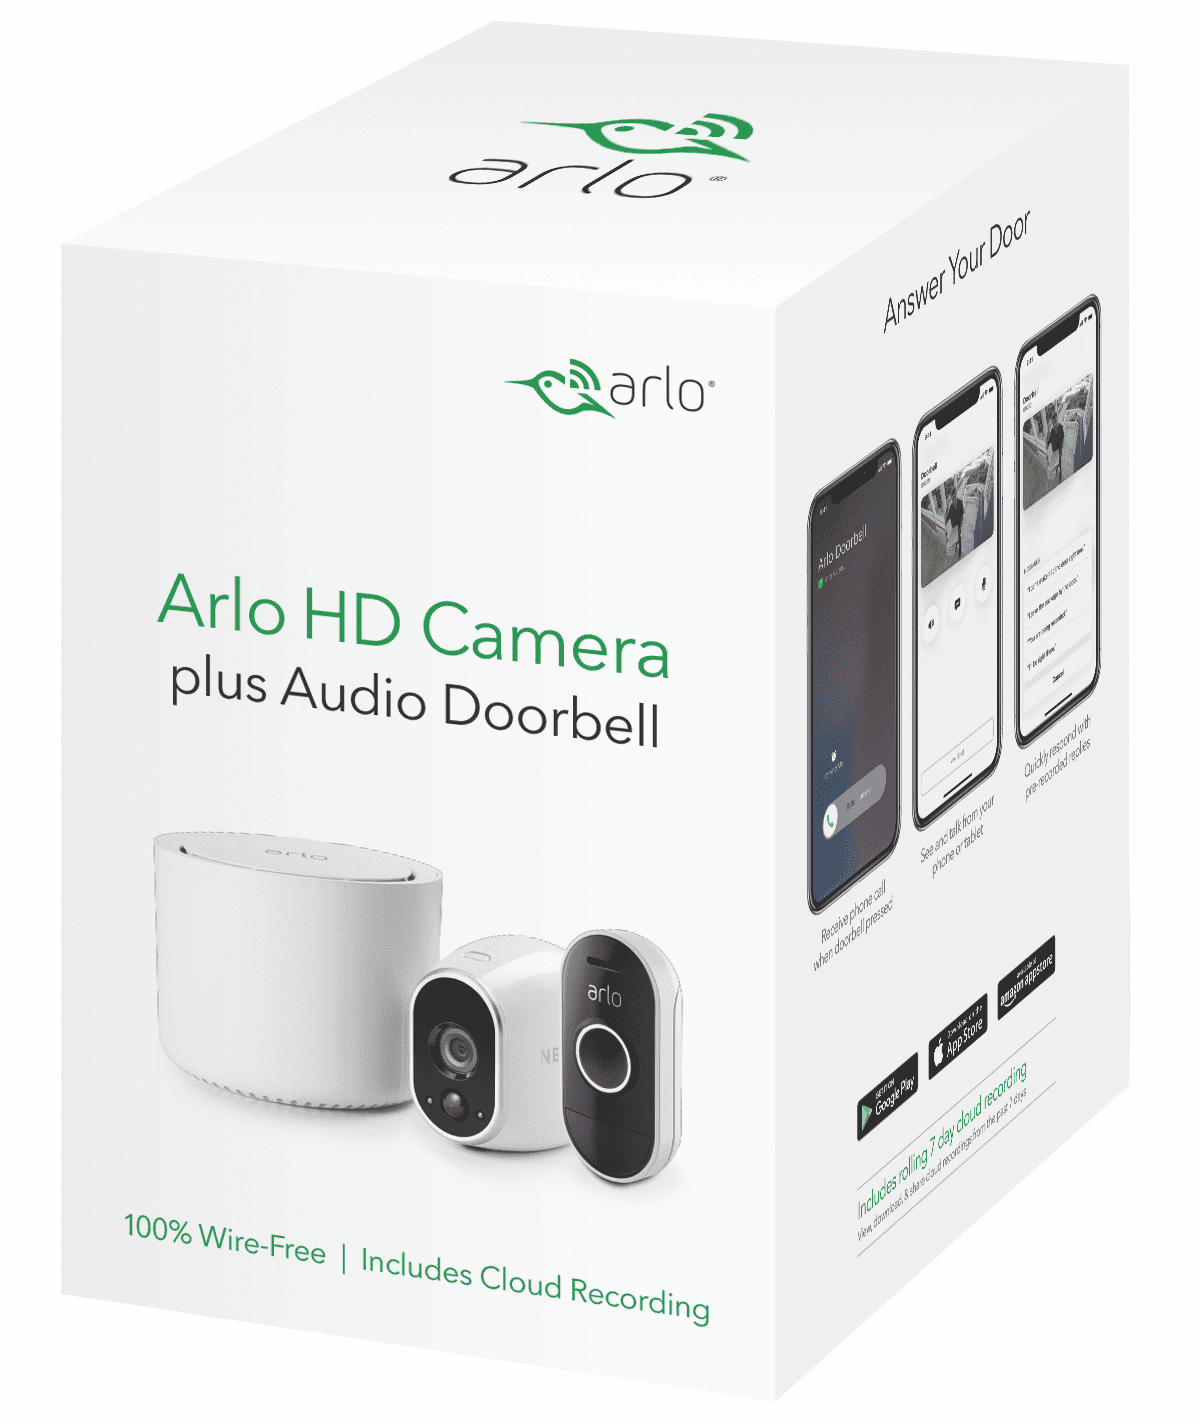 Arlo 720P HD Security Camera System with Audio Doorbell VMK3150 - Wire-Free Battery Camera with Indoor/Outdoor, Night Motion Detection - Walmart.com